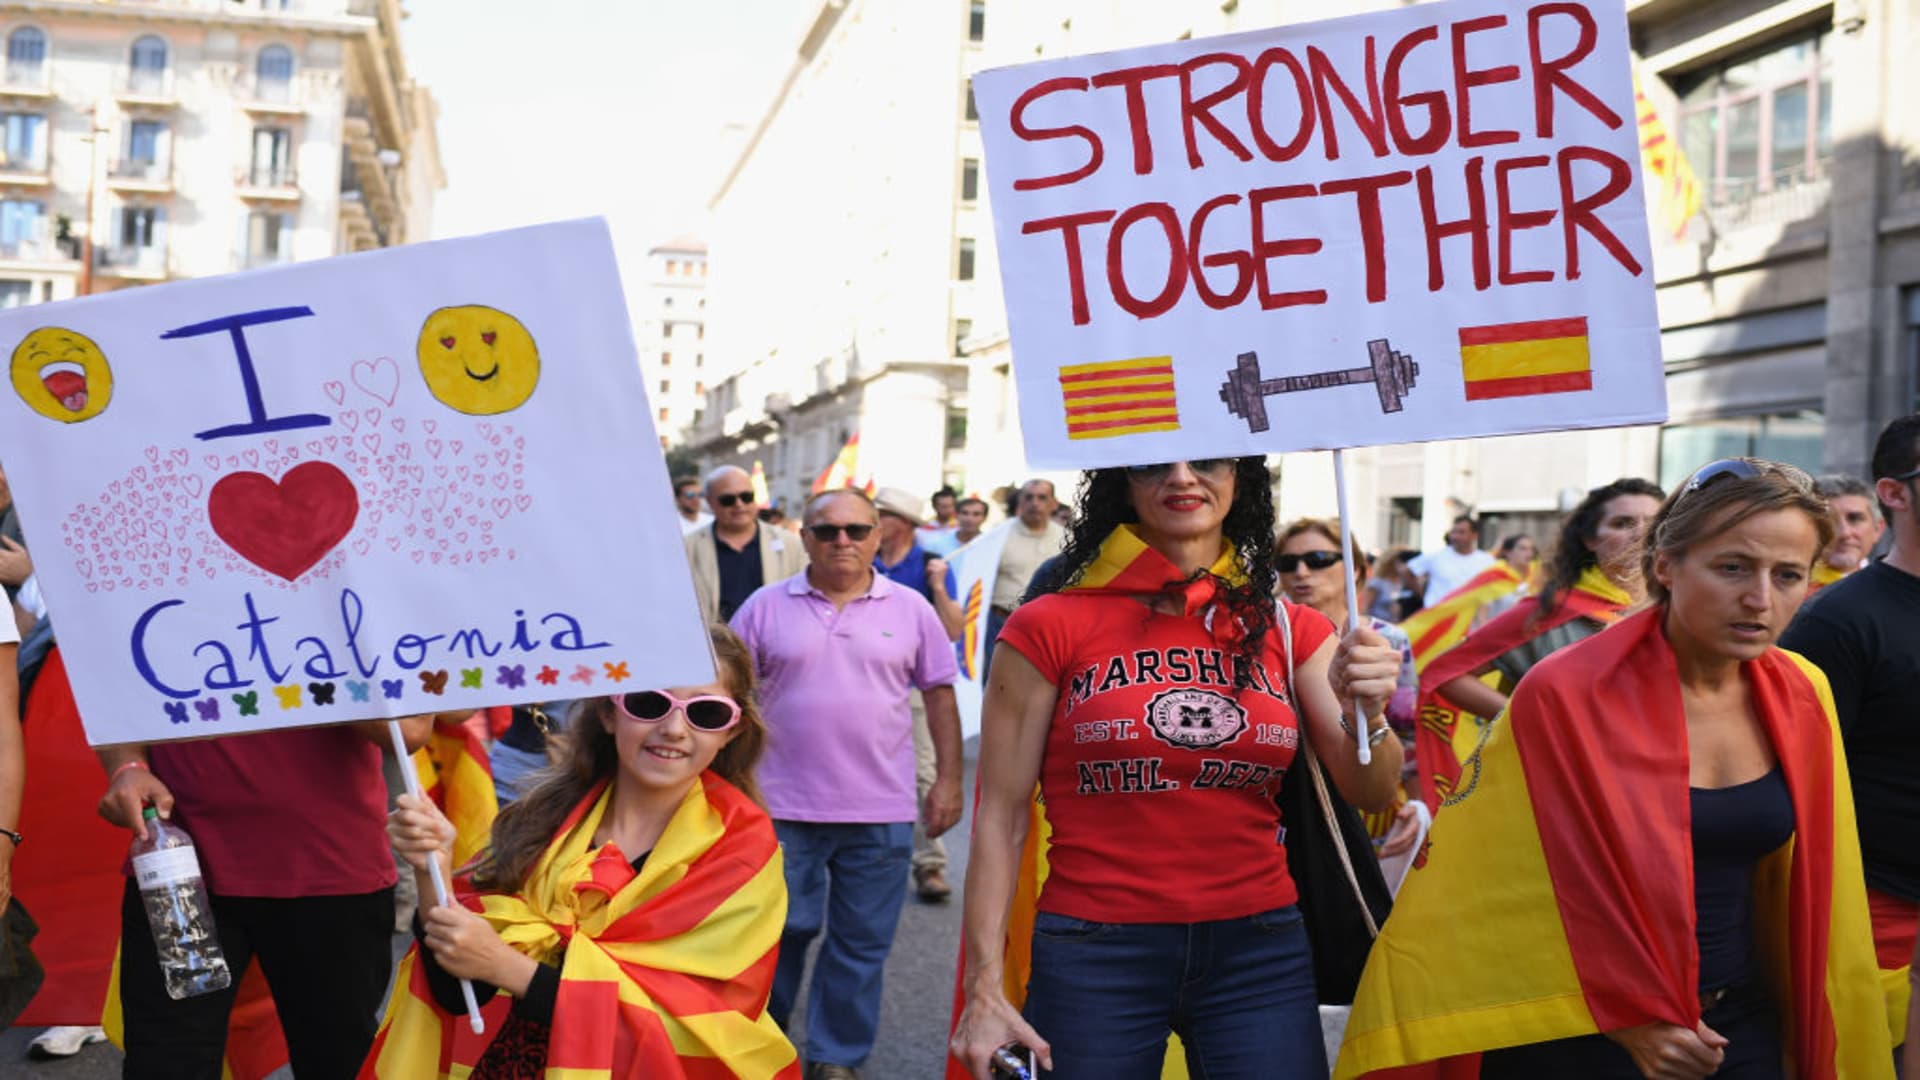 Catalan separatists lose majority as Spains pro-union Socialists win regional elections [Video]